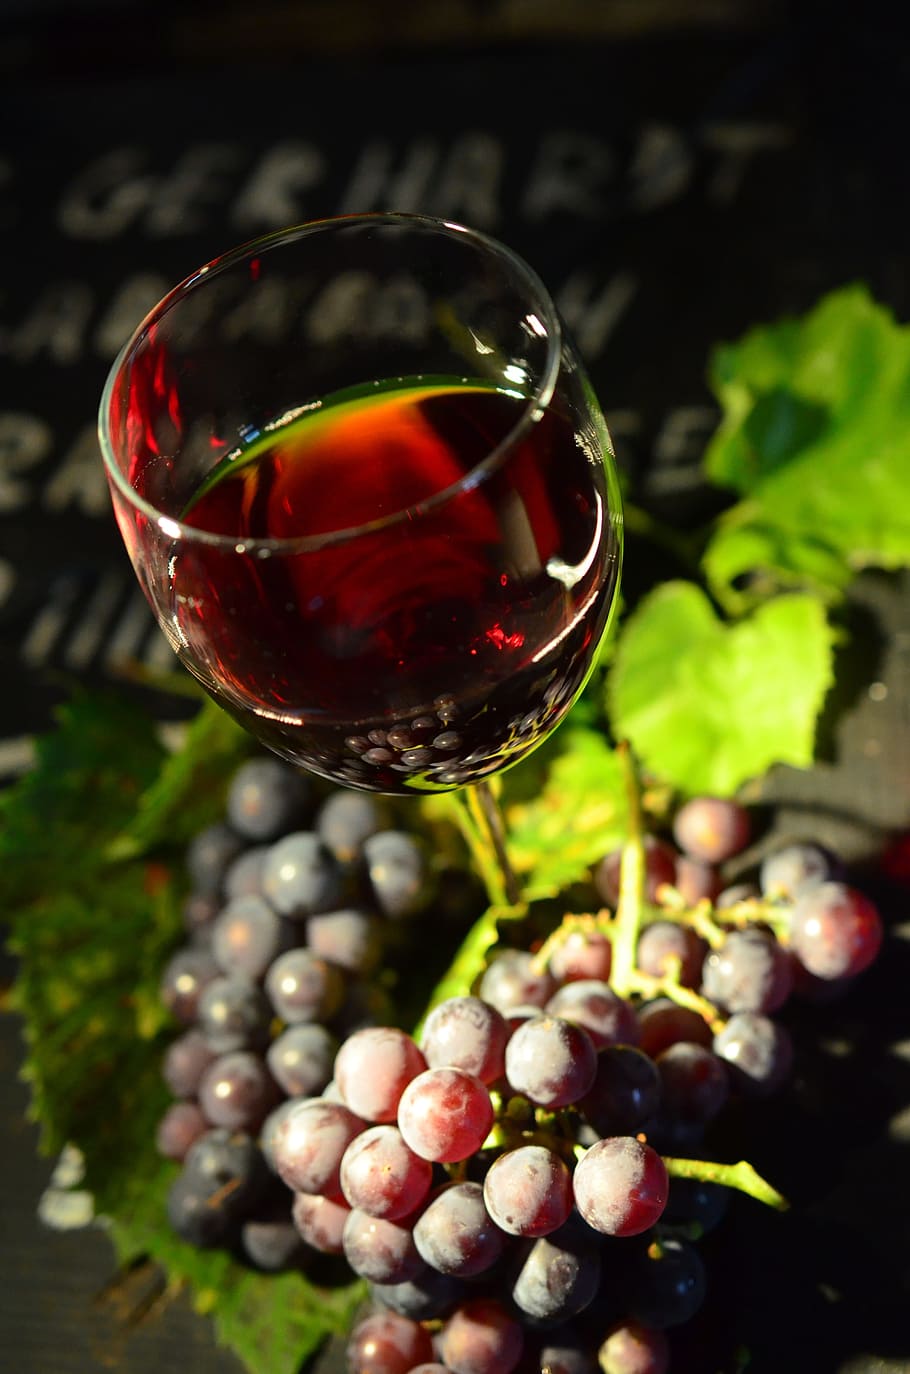 clear, glass, long, stem, wine glass, grapes, red wine, red grapes, lighting, still life